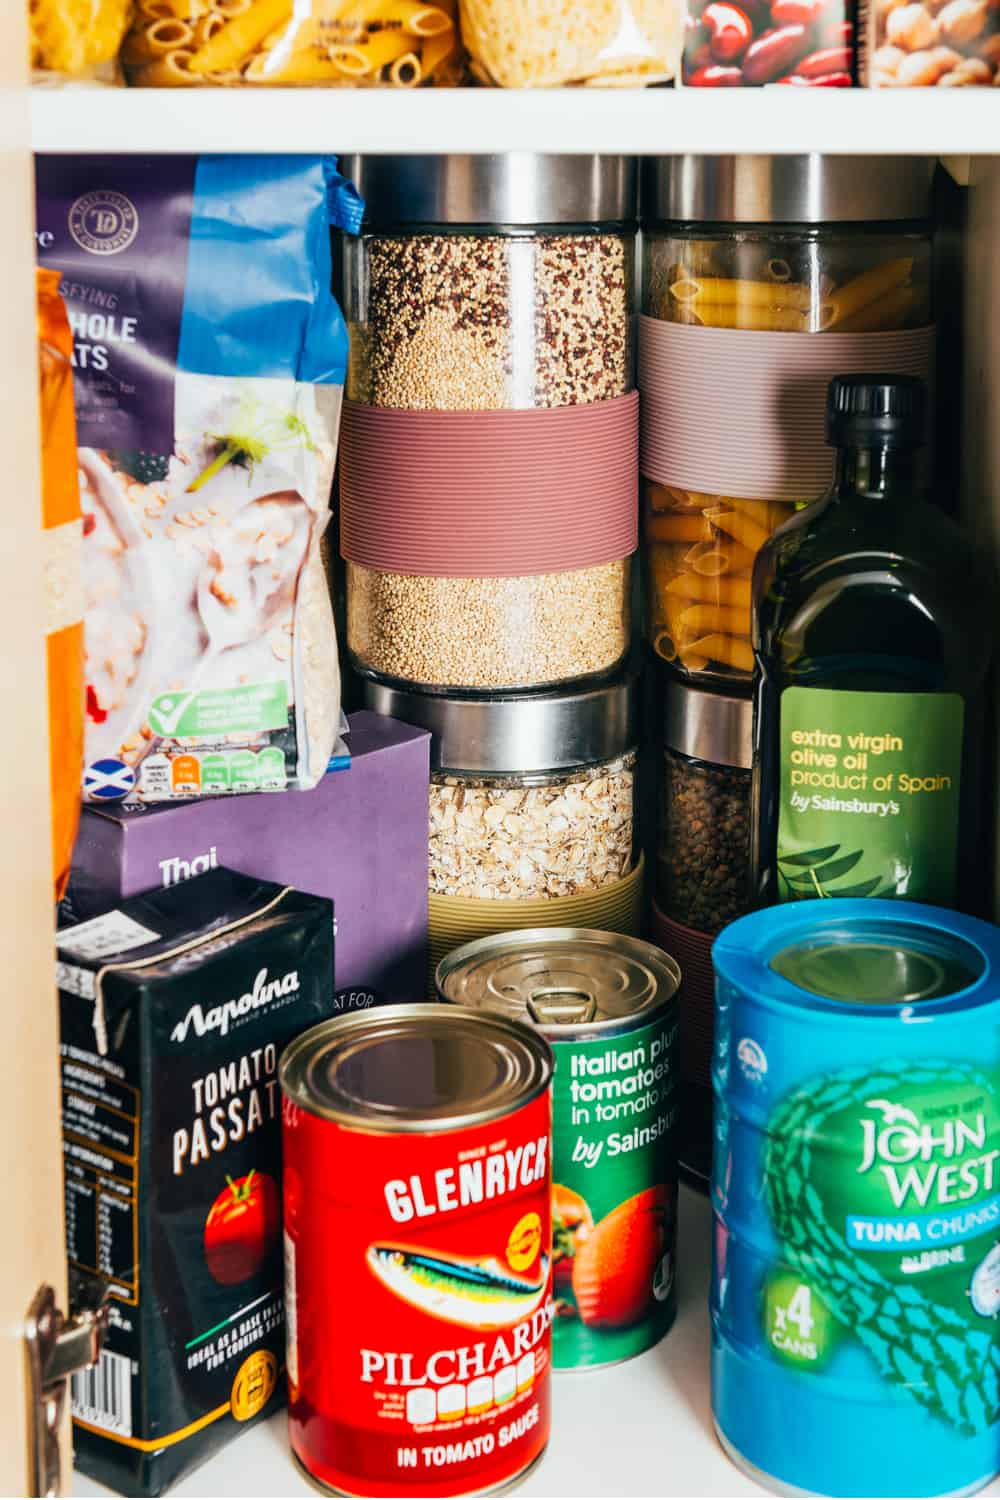 https://www.luckybelly.com/wp-content/uploads/2020/10/17-Homemade-Canned-Food-Storage-Organizer-Ideas-You-Can-DIY-Easily.jpg